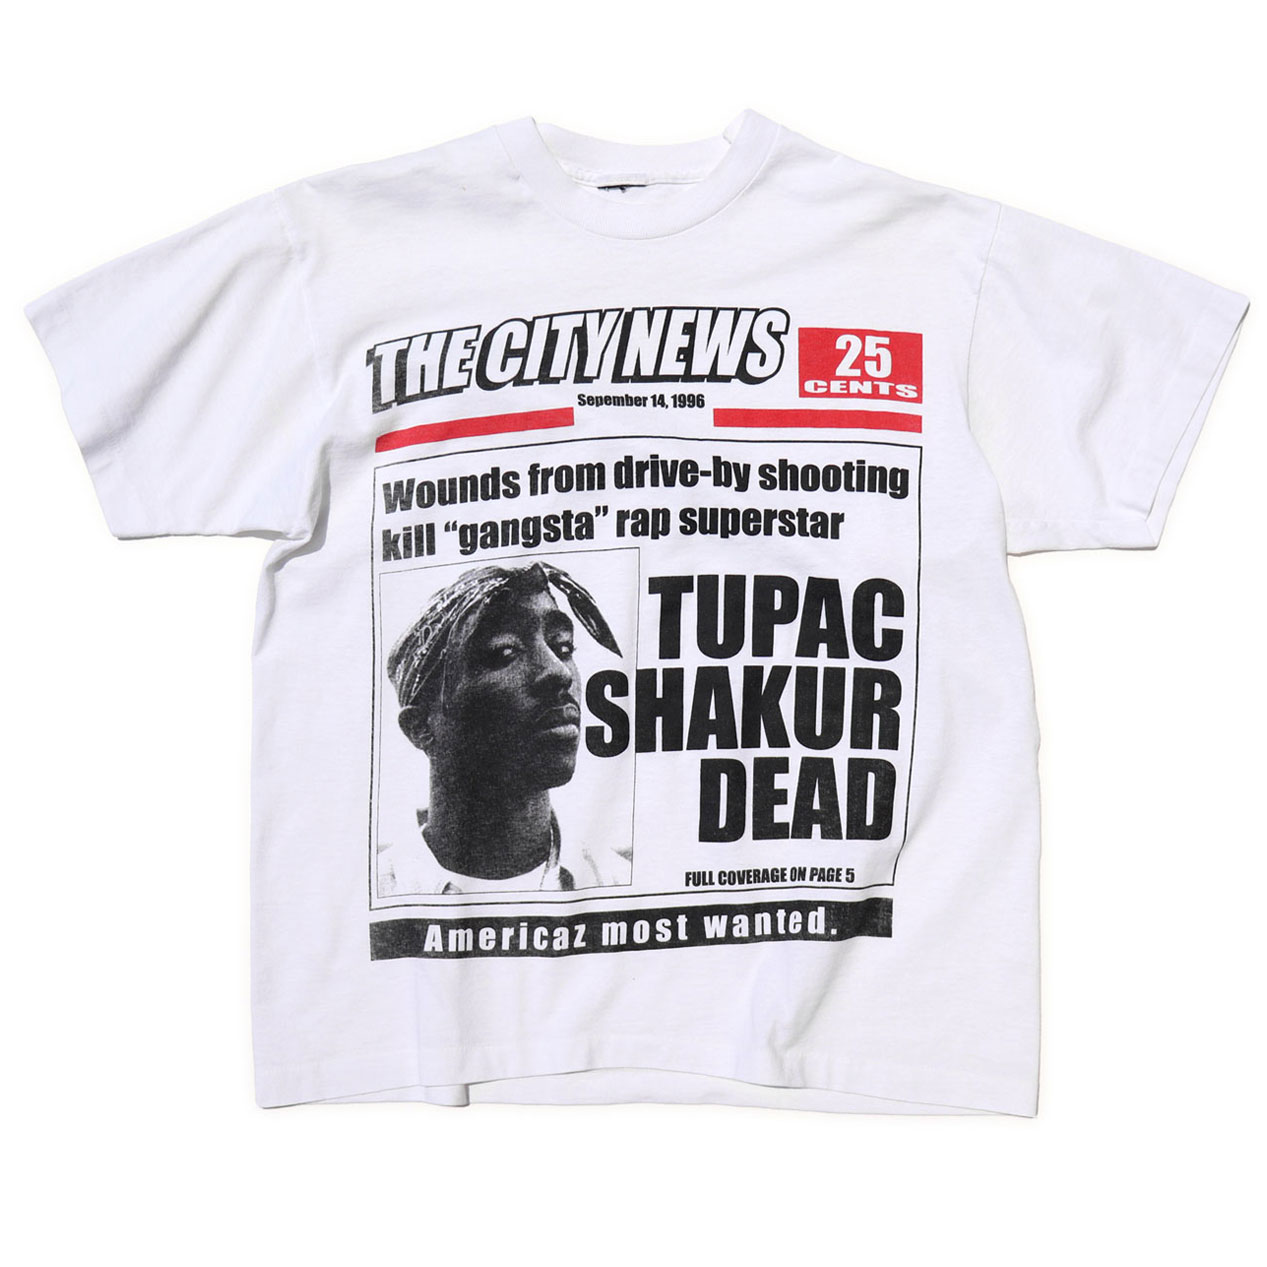 POST JUNK / 90's TUPAC ニュースペーパー柄 プリントTシャツ [About M]